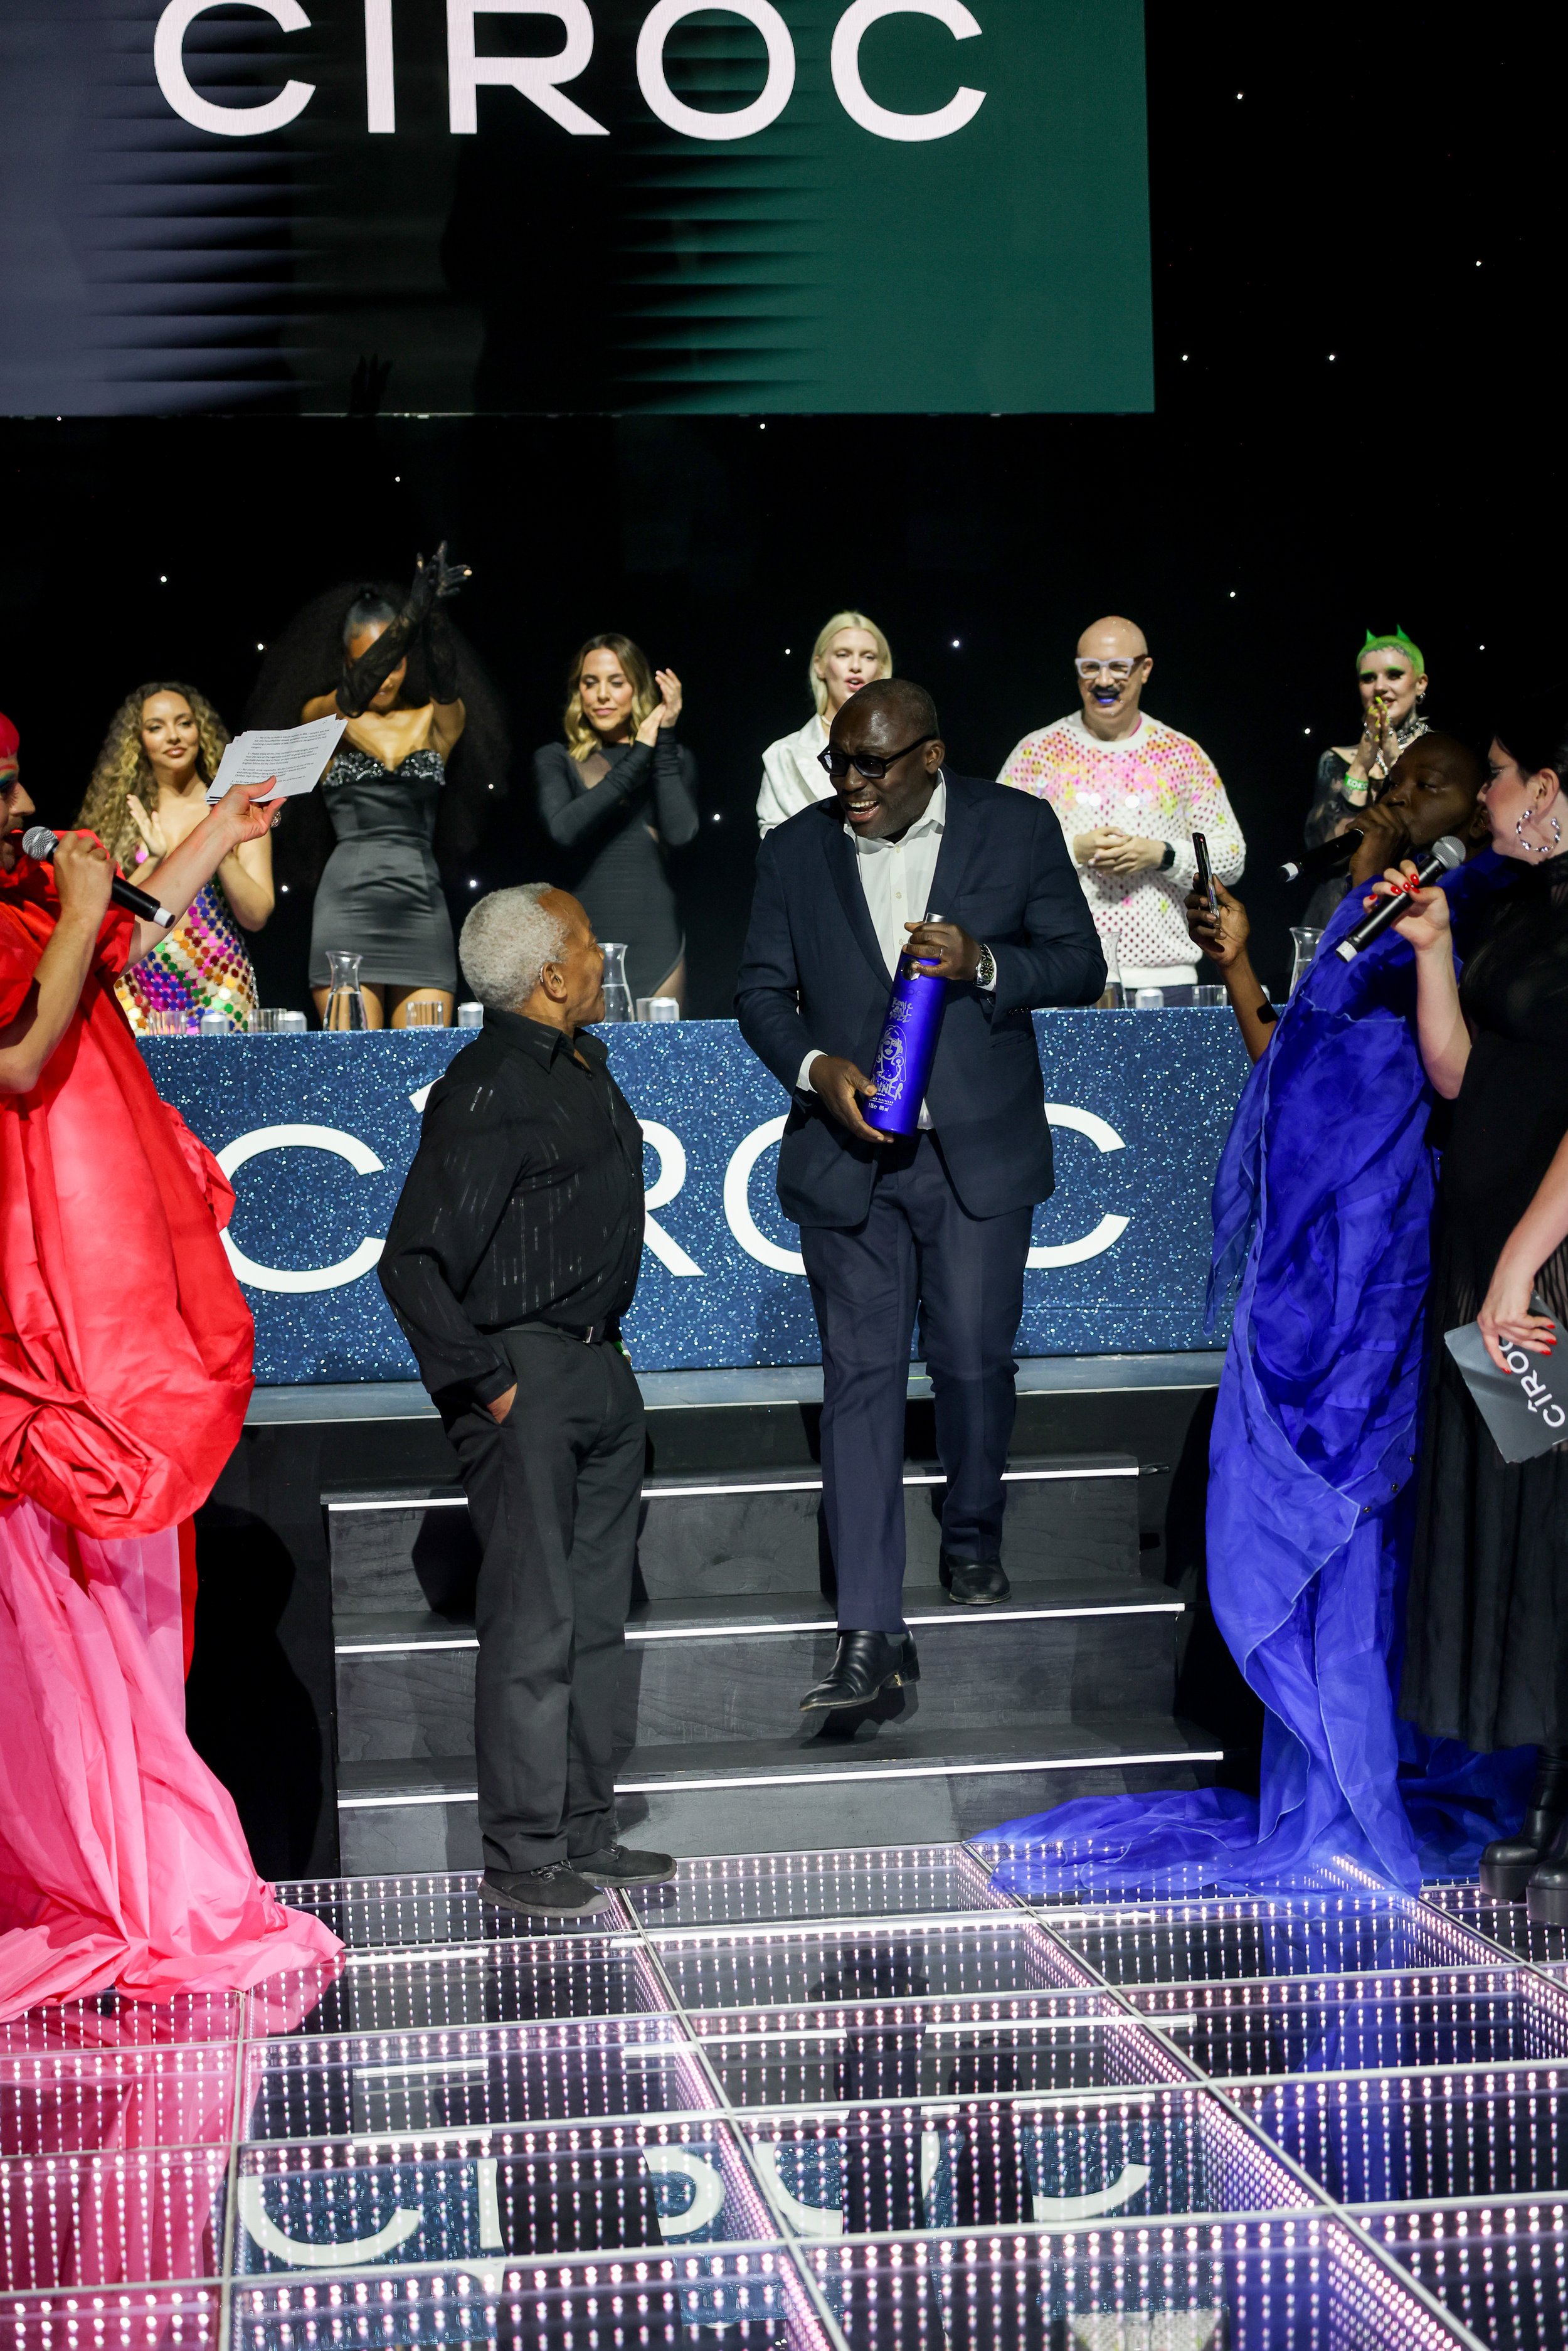  LONDON, ENGLAND - JUNE 30: Ted Brown and Editor-In-Chief of British Vogue Edward Enninful attend the CÎROC Iconic Ball in support of Not A Phase at KOKO on June 30, 2022 in London, England. Today, the first ever CÎROC Iconic Ball brought the house d